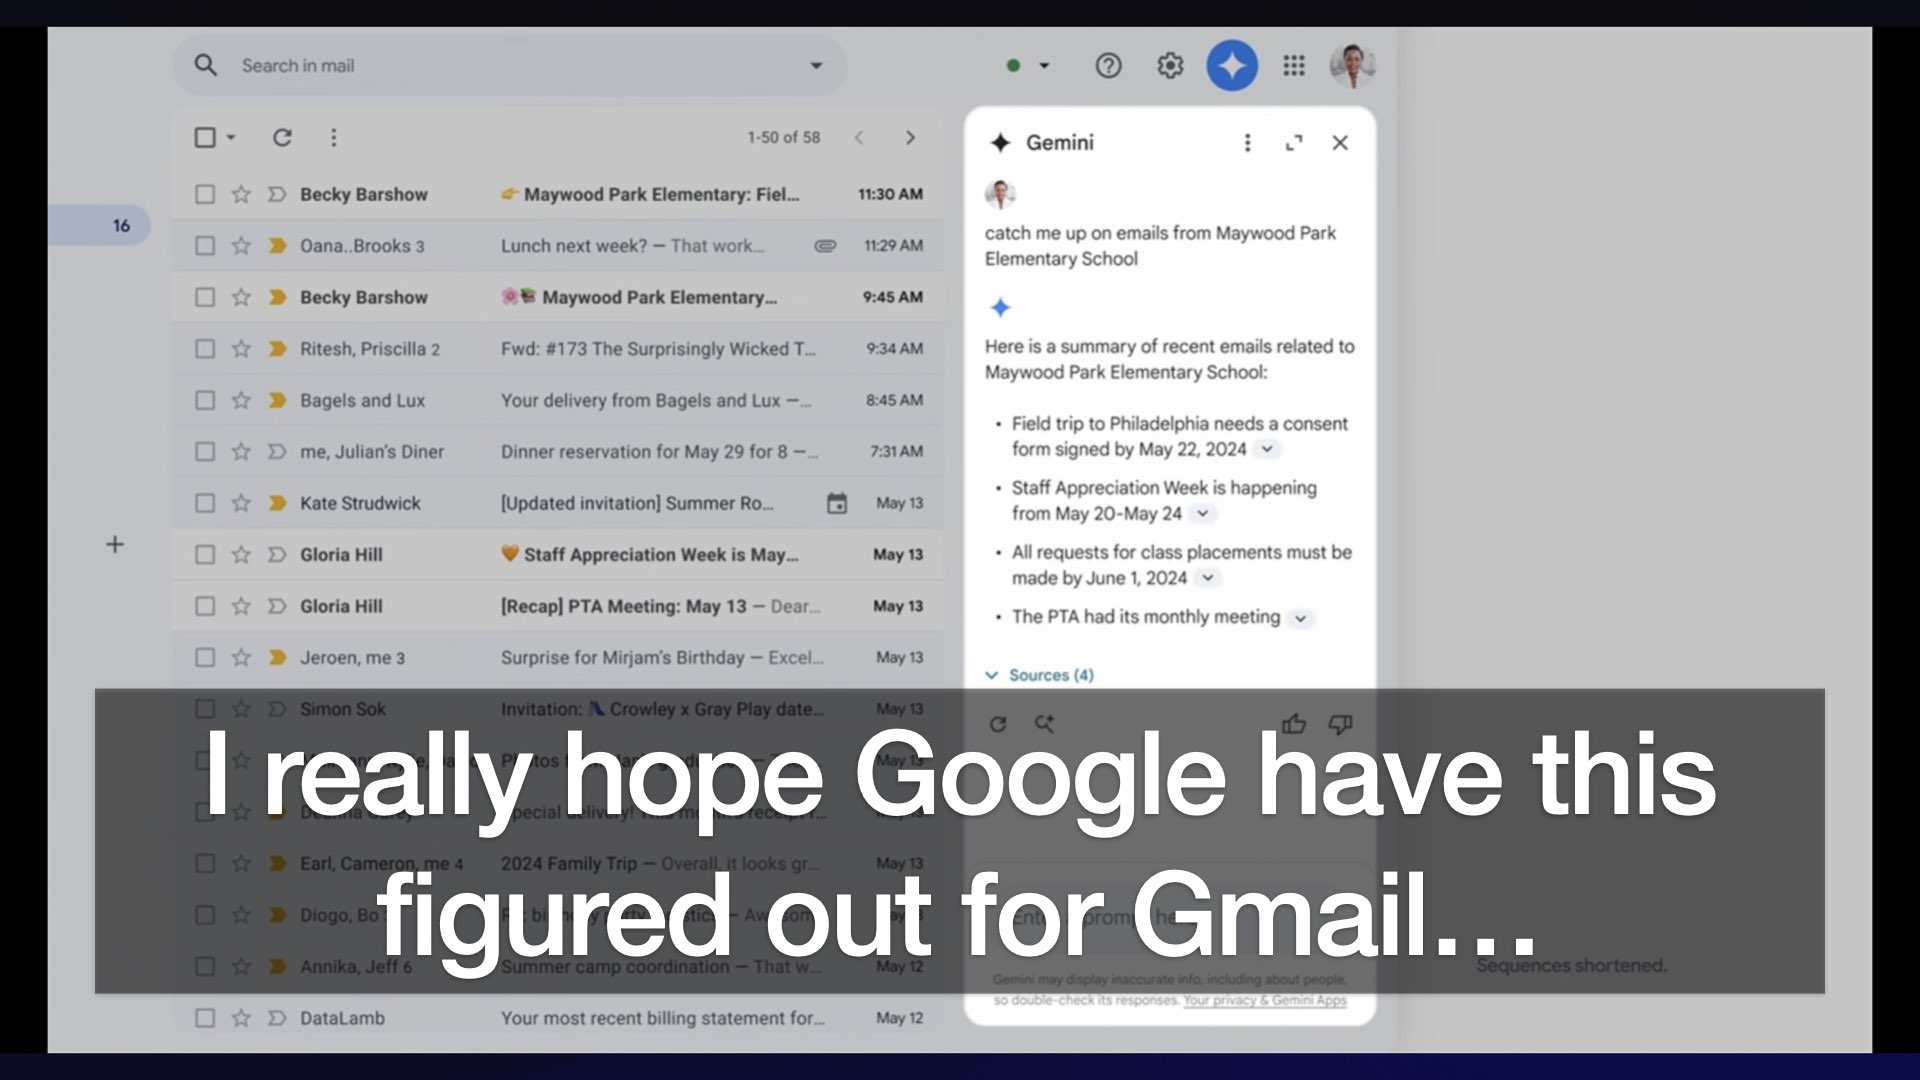 Screenshot of a Gmail digital assistant example. An overlay reads I really hope Google have this figured out for Gmail...